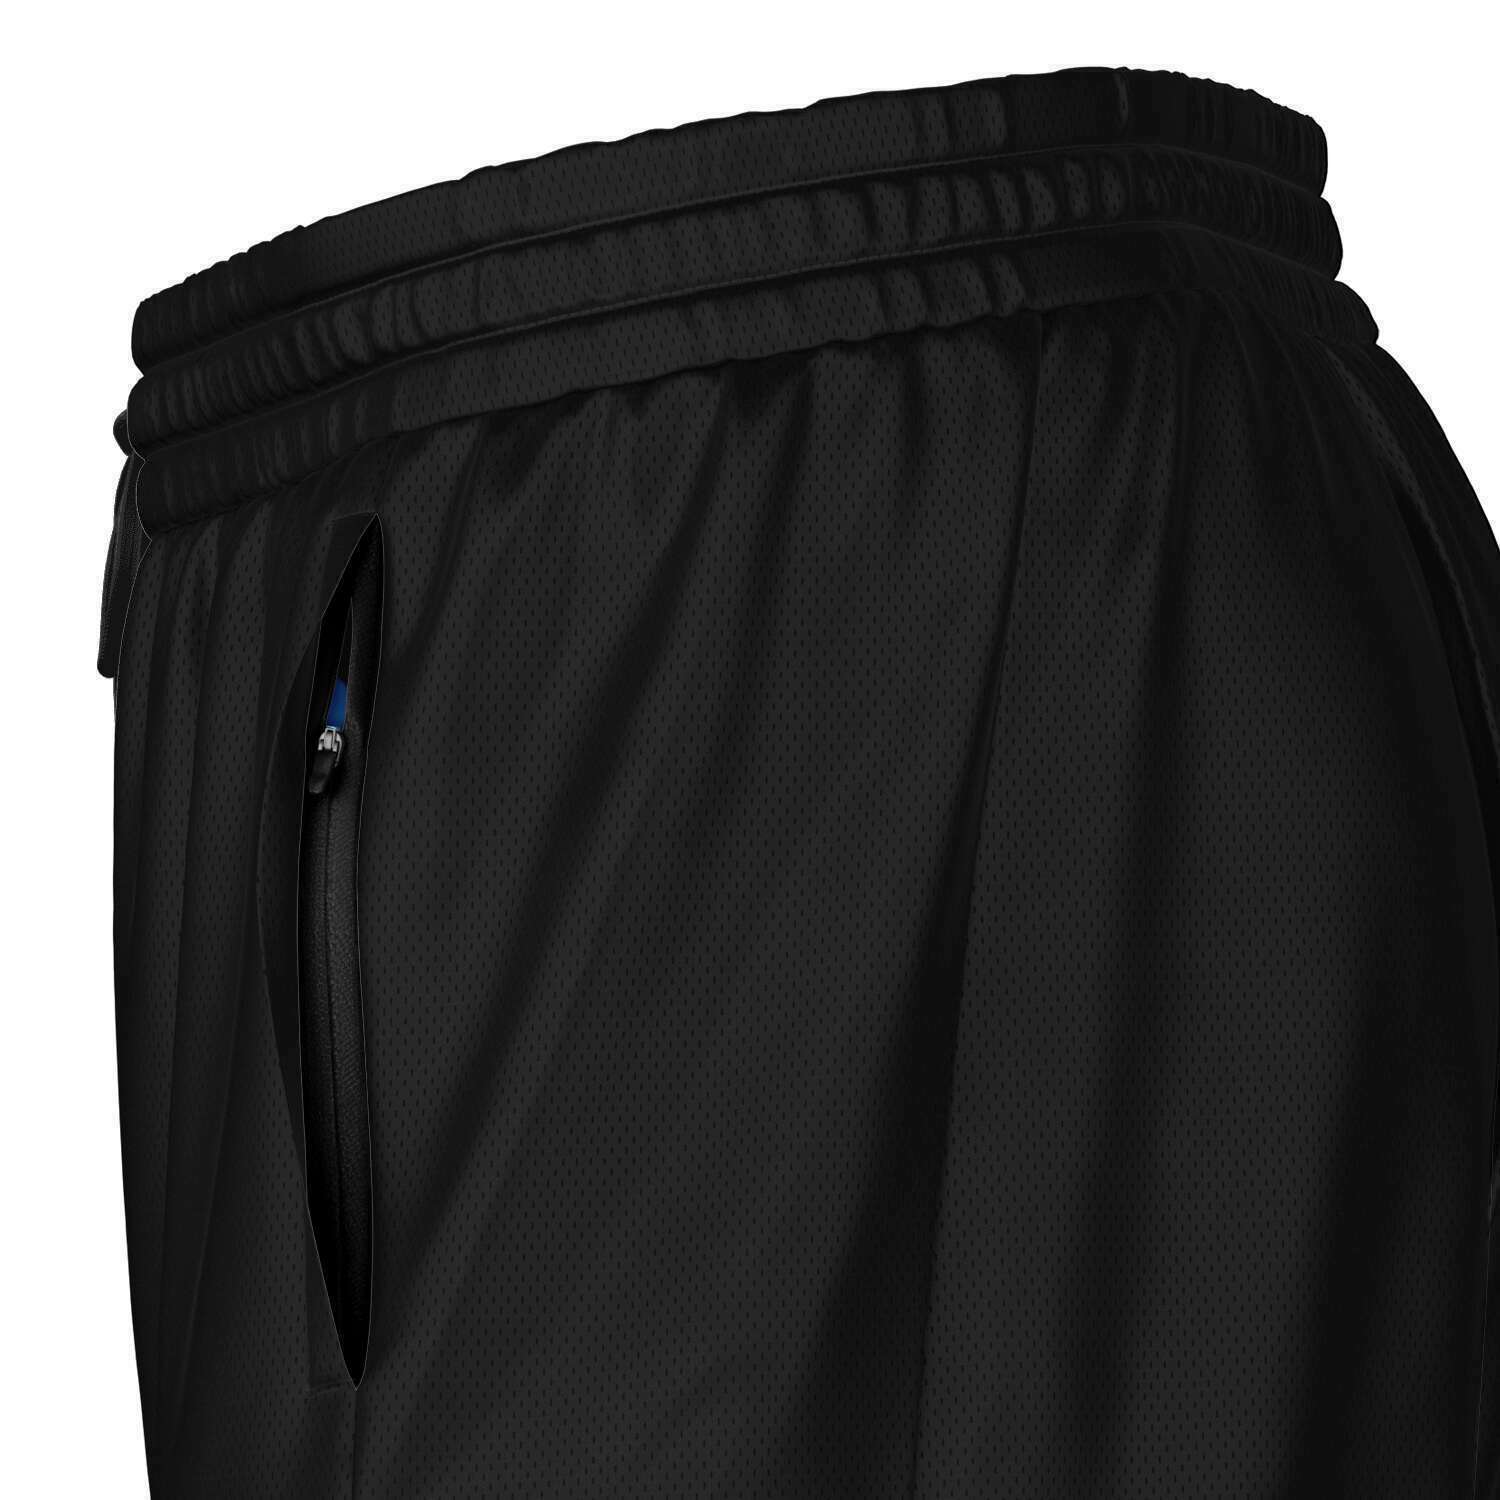 Rad Palm Saved By The Bell Men's 2-in-1 Shorts